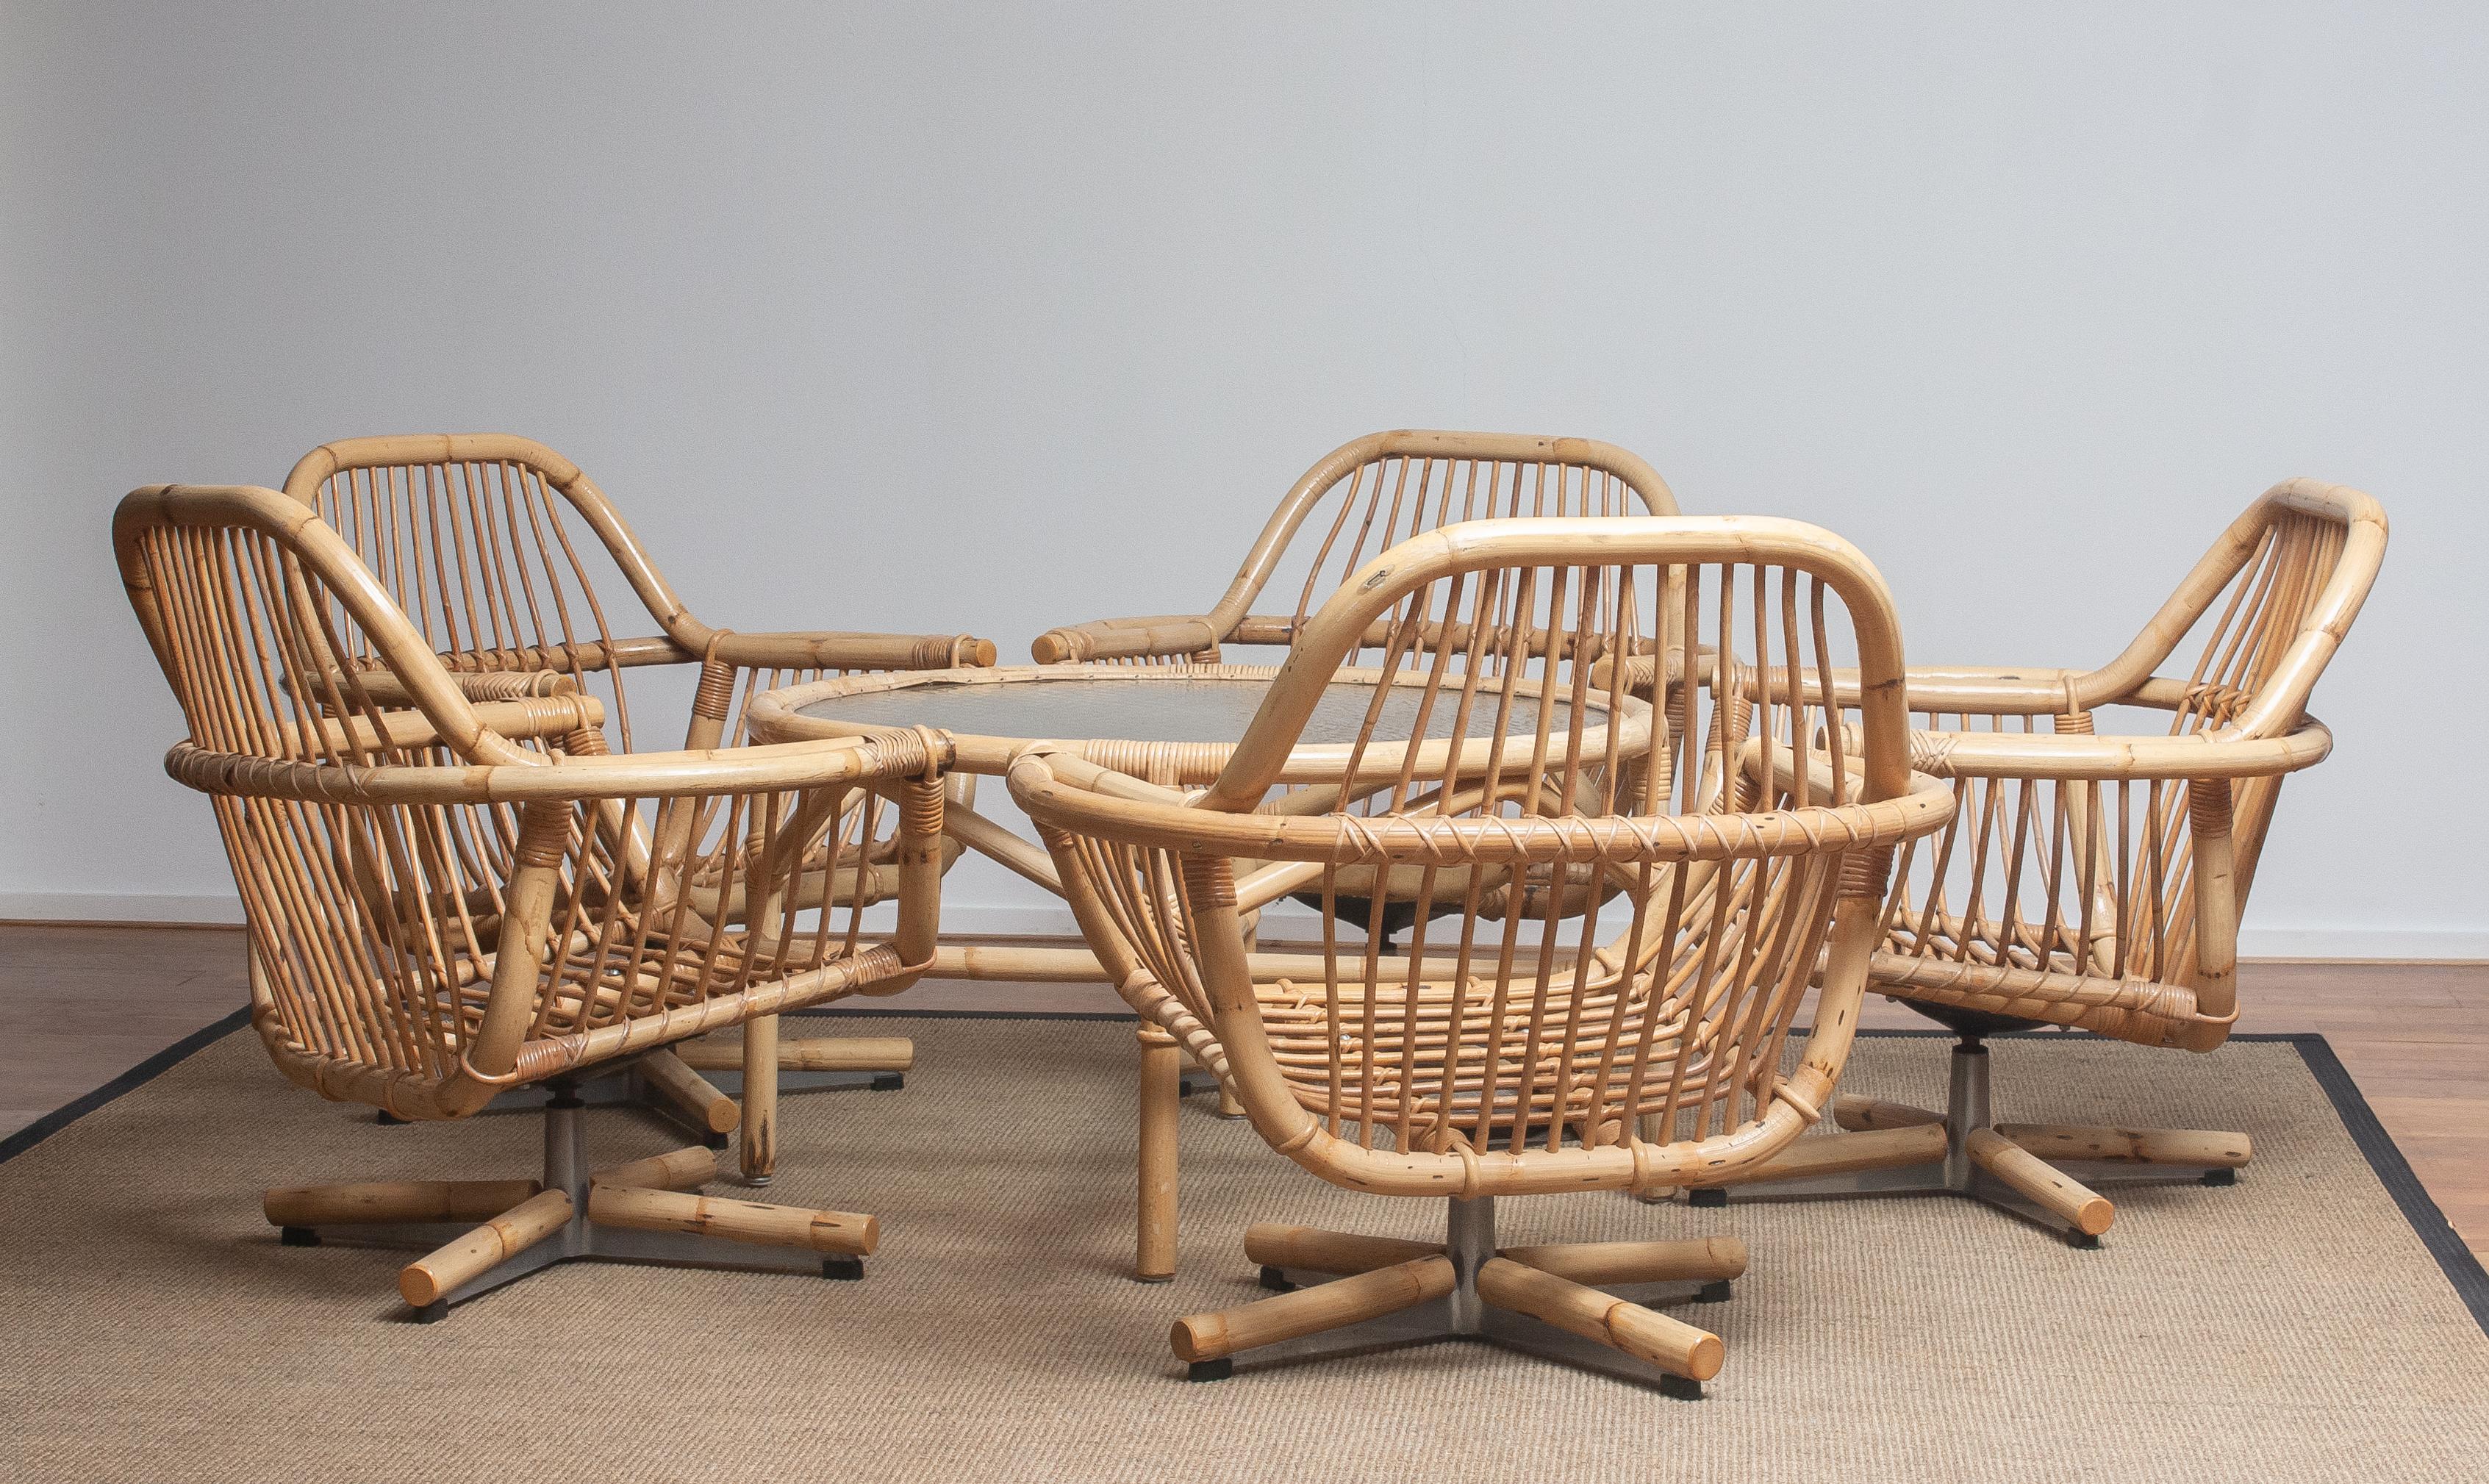 Extremely beautiful and rare Scandinavian garden set or lounge set consisting five rattan swivel chairs (on an aluminum Stand) and one coffee table all in original and good condition.
Made in Sweden in the 1960s.
Sizes of the five chairs are for